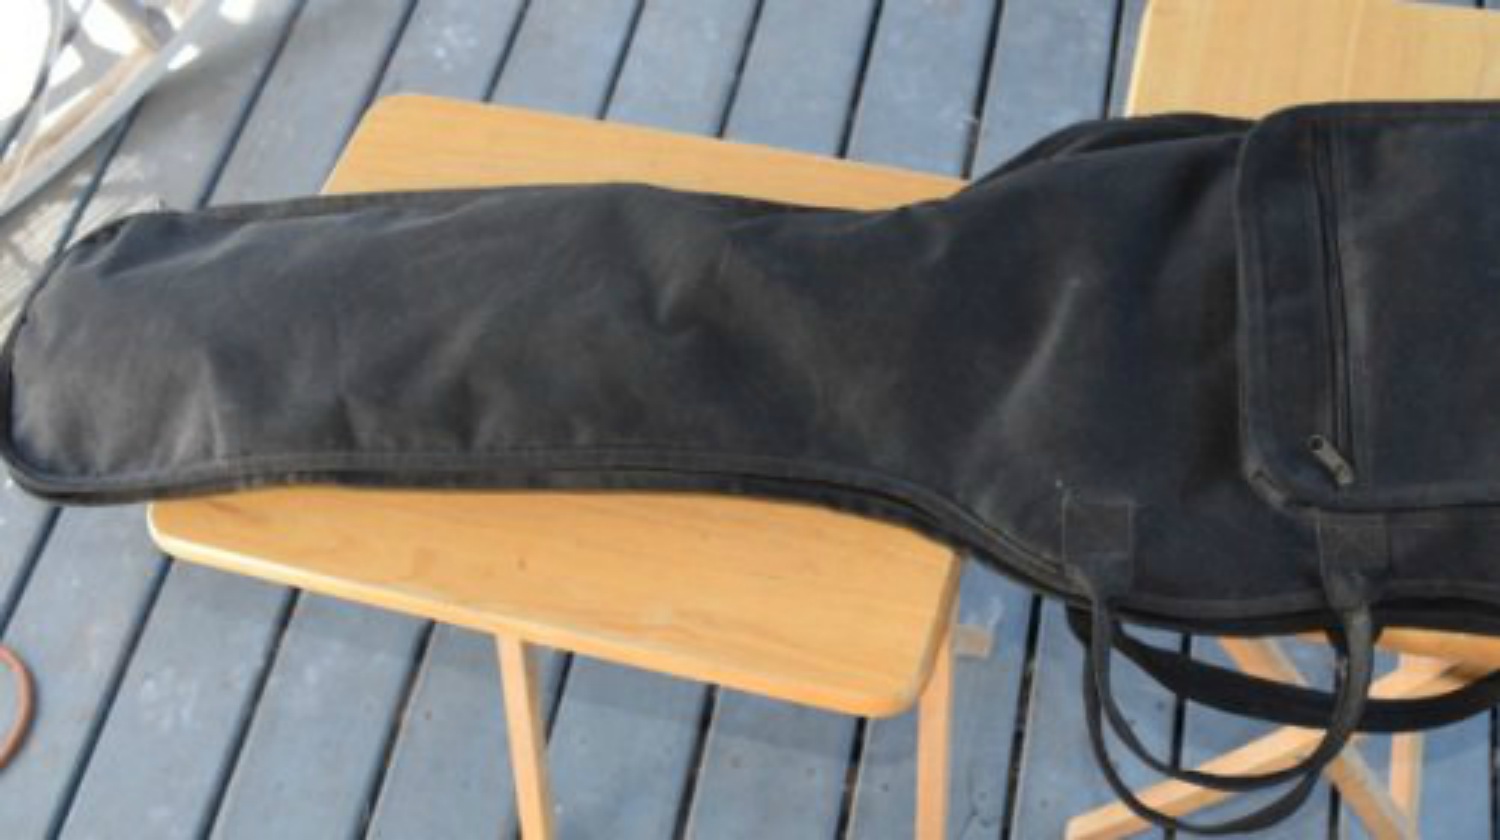 bass guitar case on table | An Alternative To Leaving Your Gun In Your Car Or Truck At Night | leaving your gun in the car | car gun safe | Featured